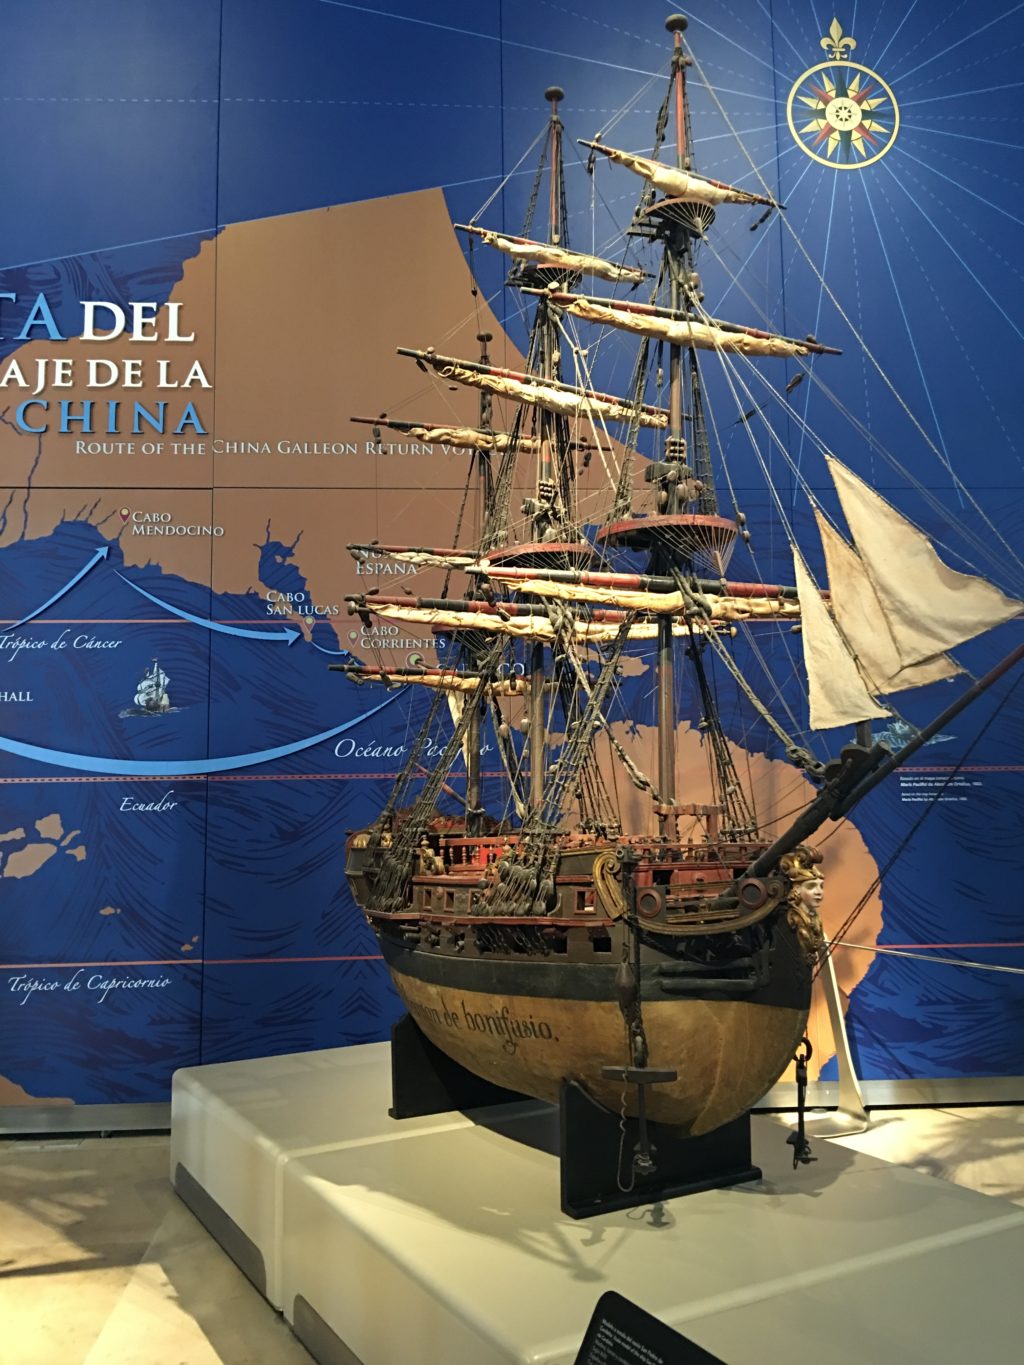 AMINIATURE galleon is one of the items at the Museo Internacional del Barroco in Puebla City, Mexico, which prominently features Philippine colonial history and its role in the galleon trade. TARRA QUISMUNDO